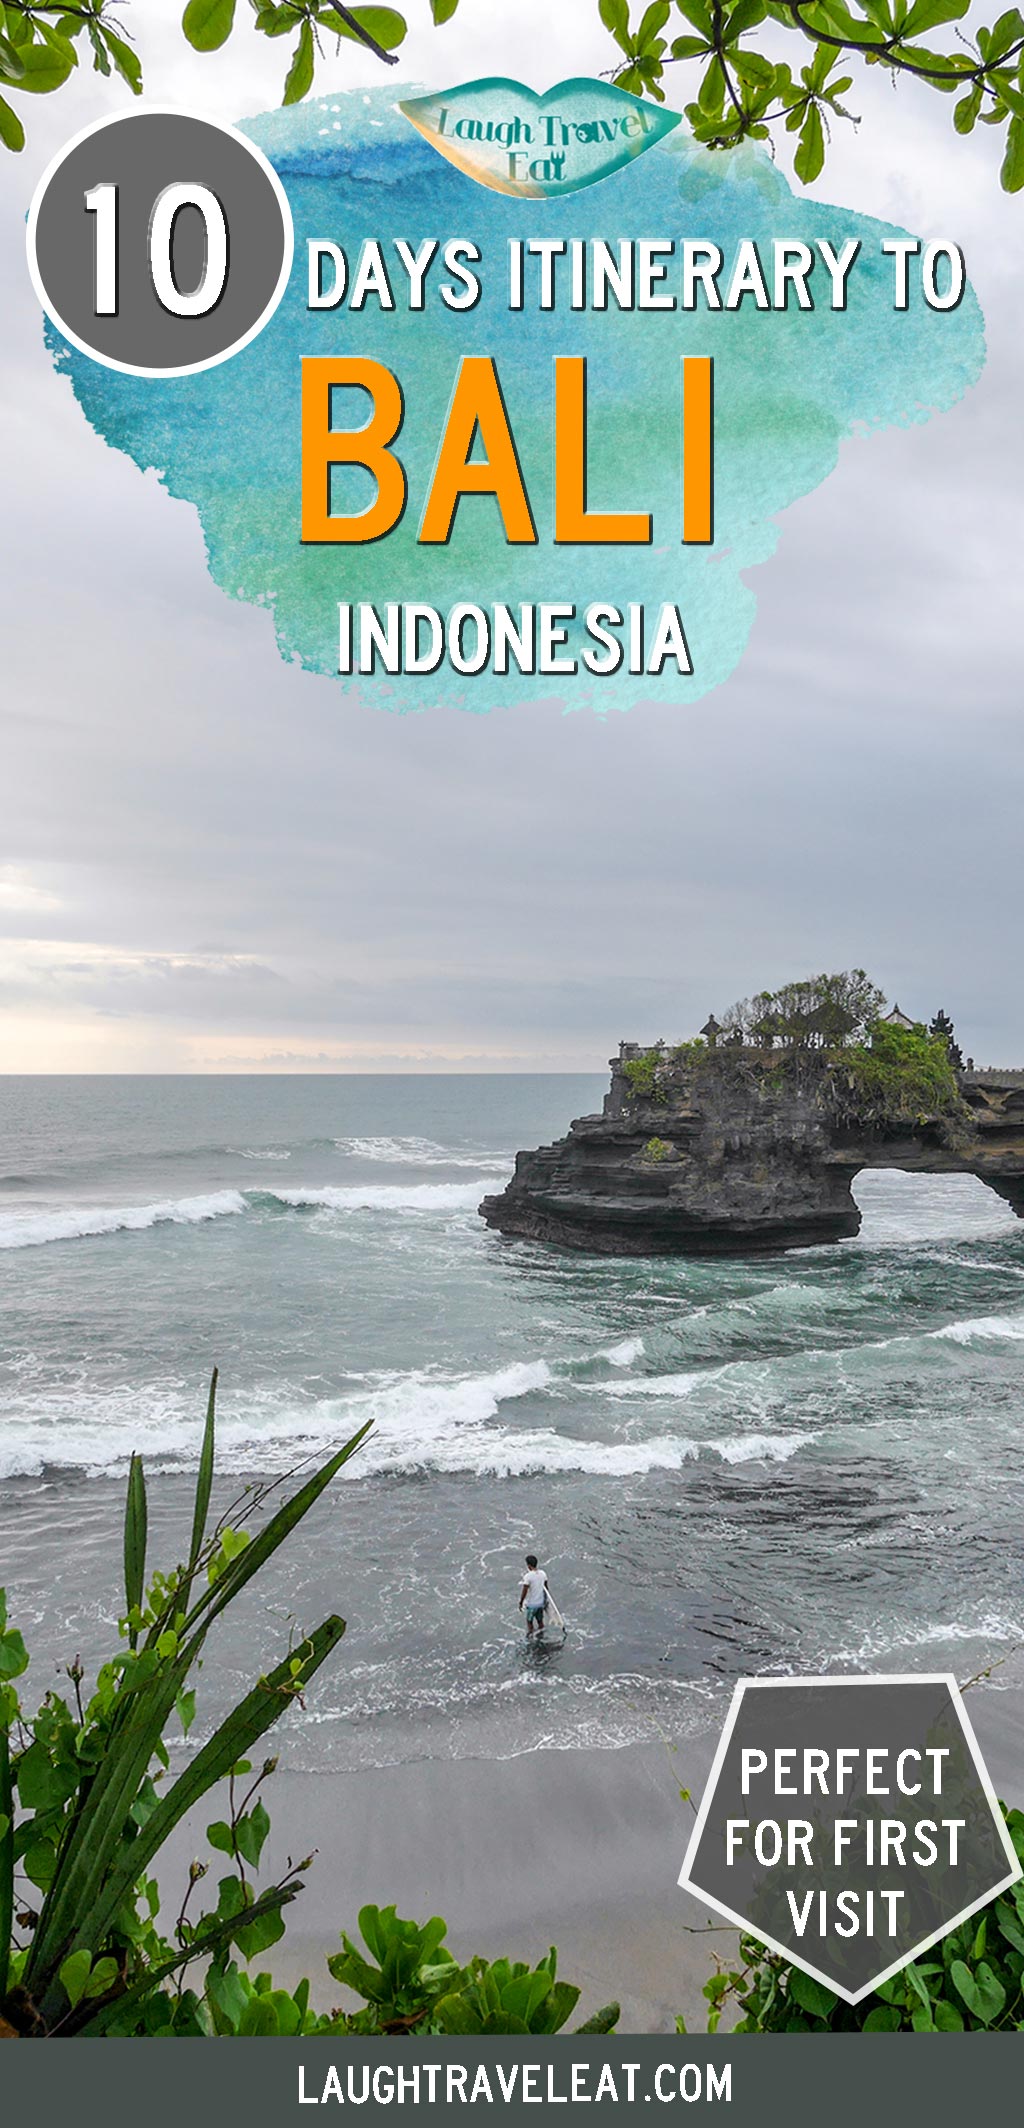 Bali is a top tourist destination but it isn't as small as you'd think. Here's a perfect 10 day itinerary for the active first time visitor: